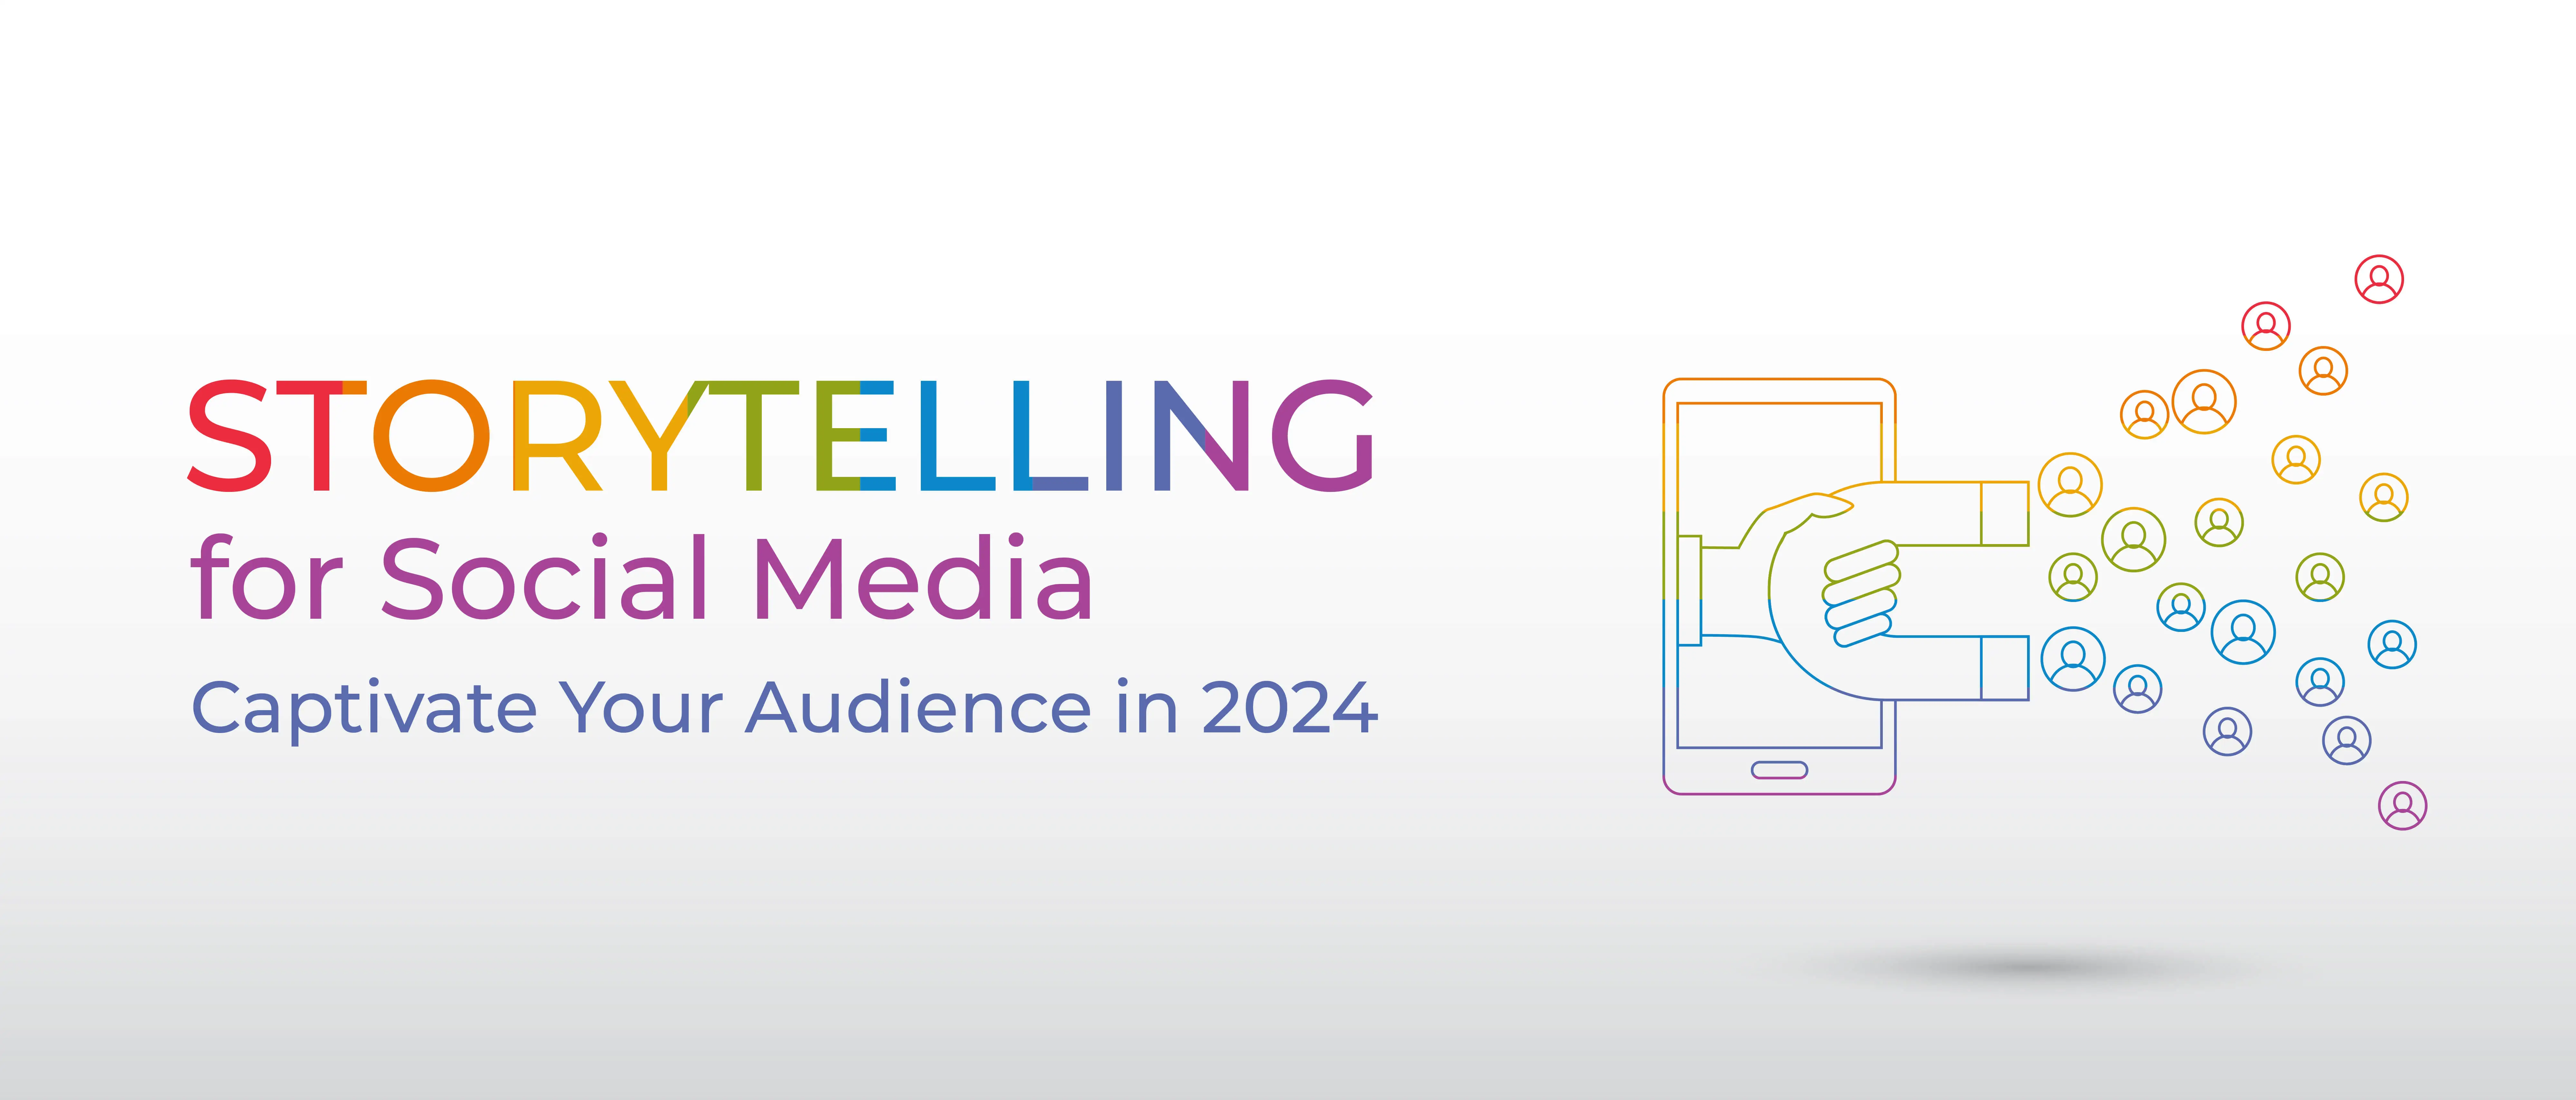 Storytelling for Social Media: Captivate Your Audience in 2024